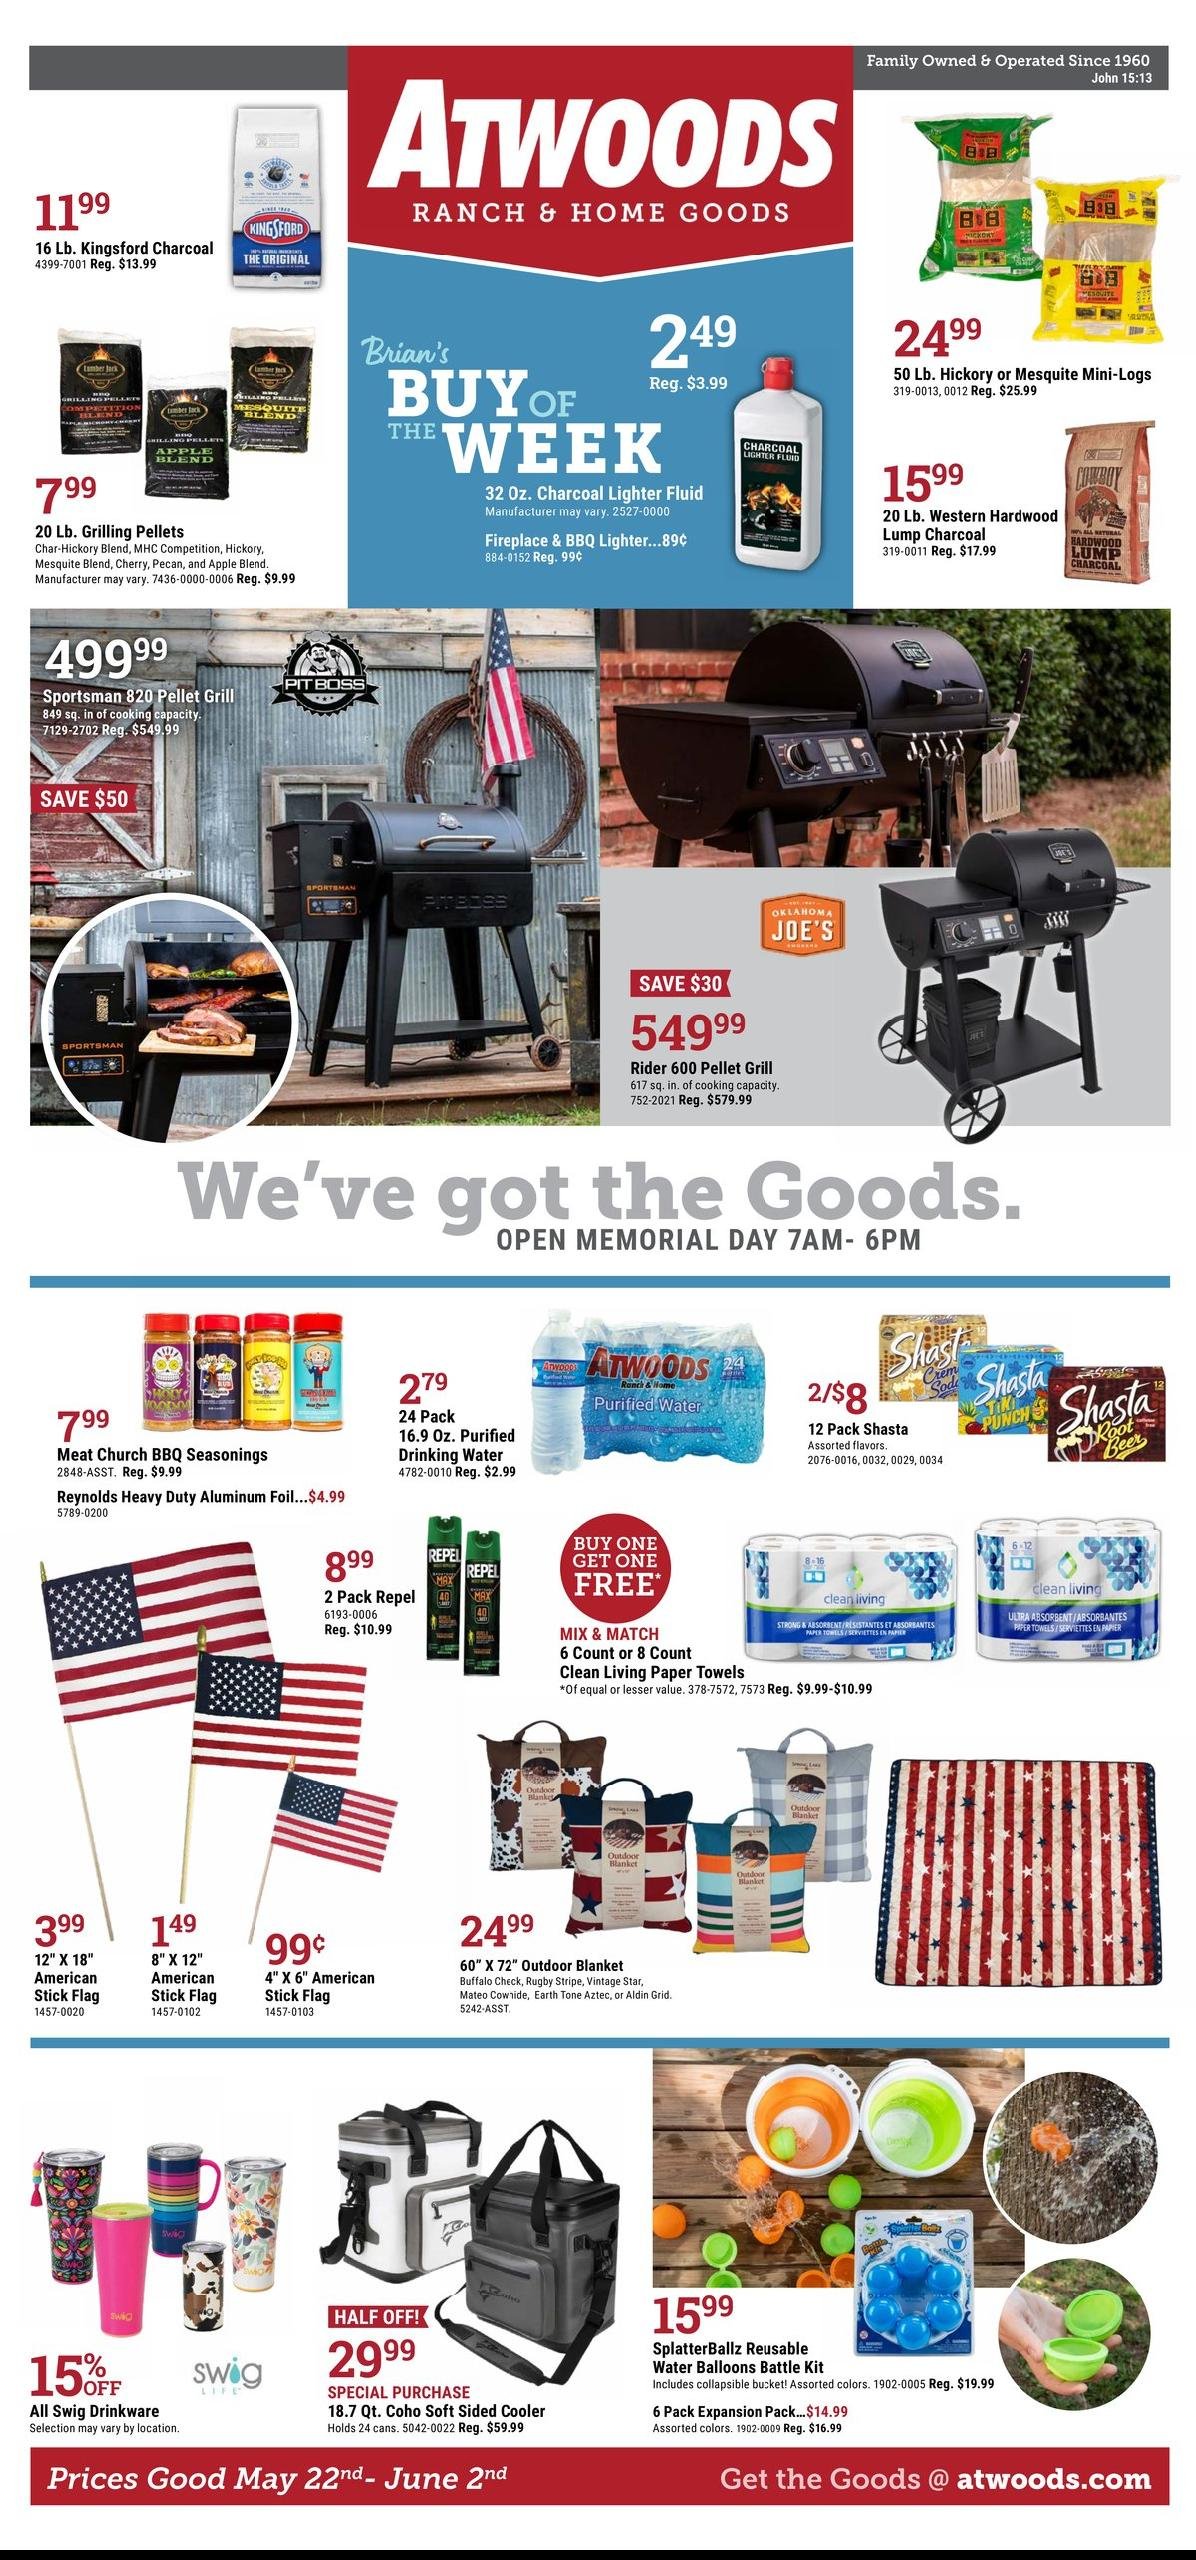 Atwoods Ranch & Home weekly ad - page 1